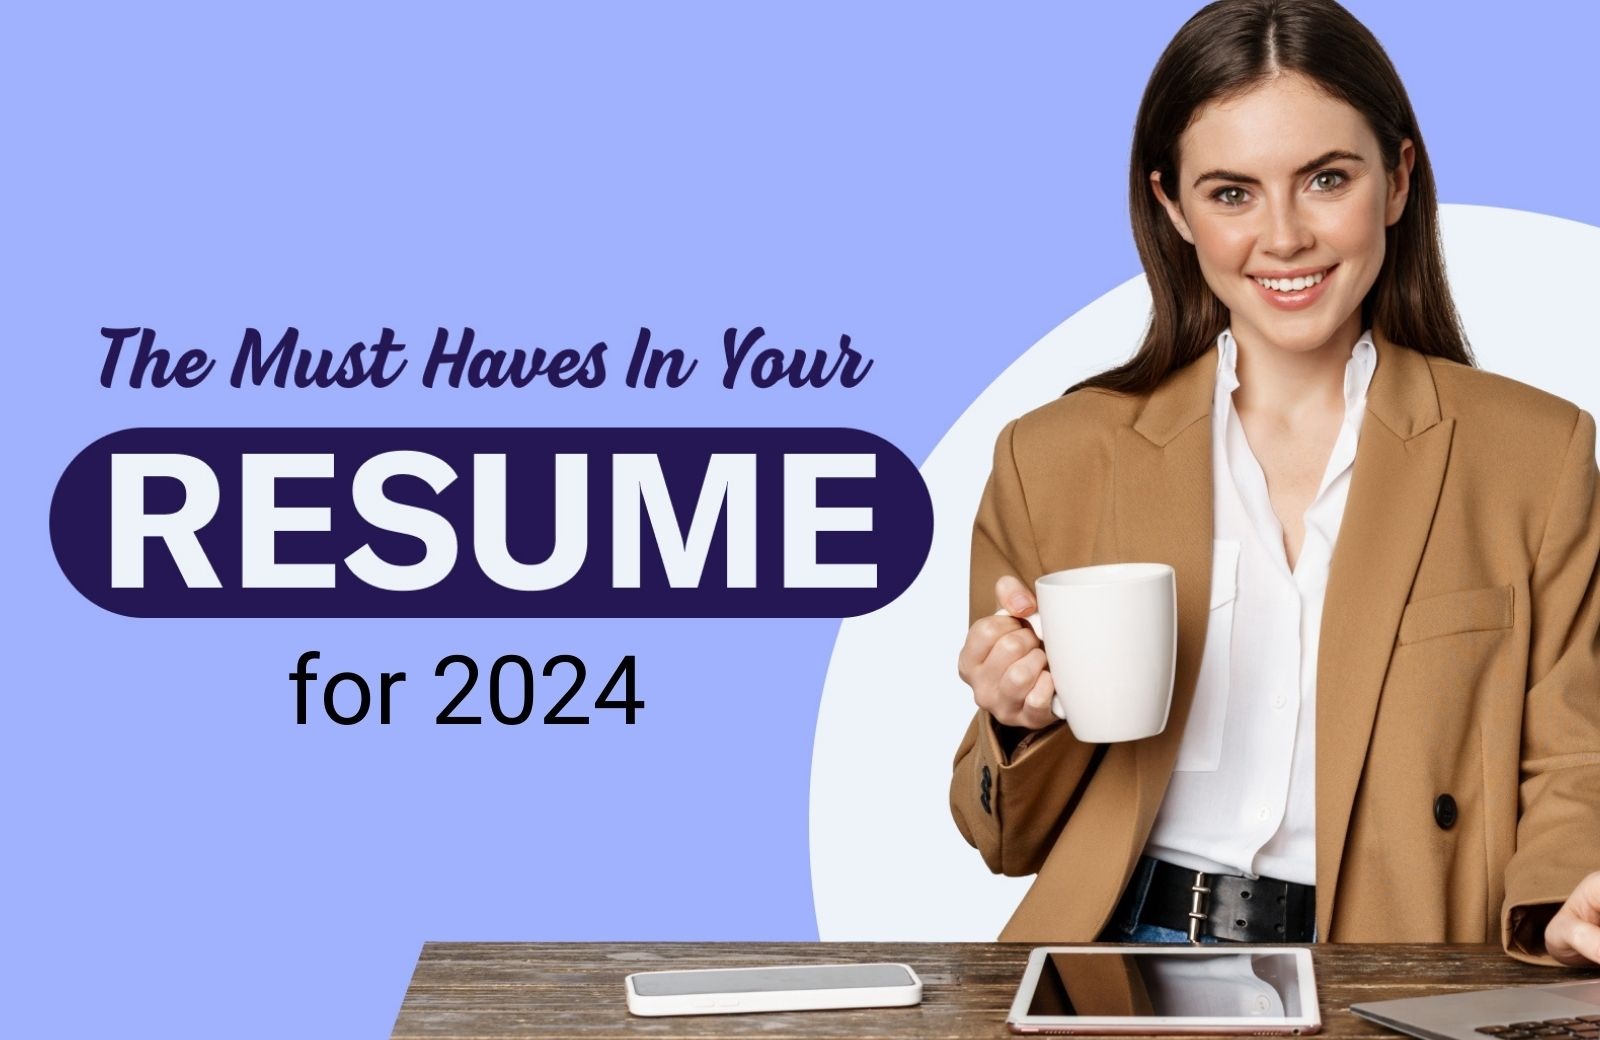 The Must Haves in Your Resume for 2024